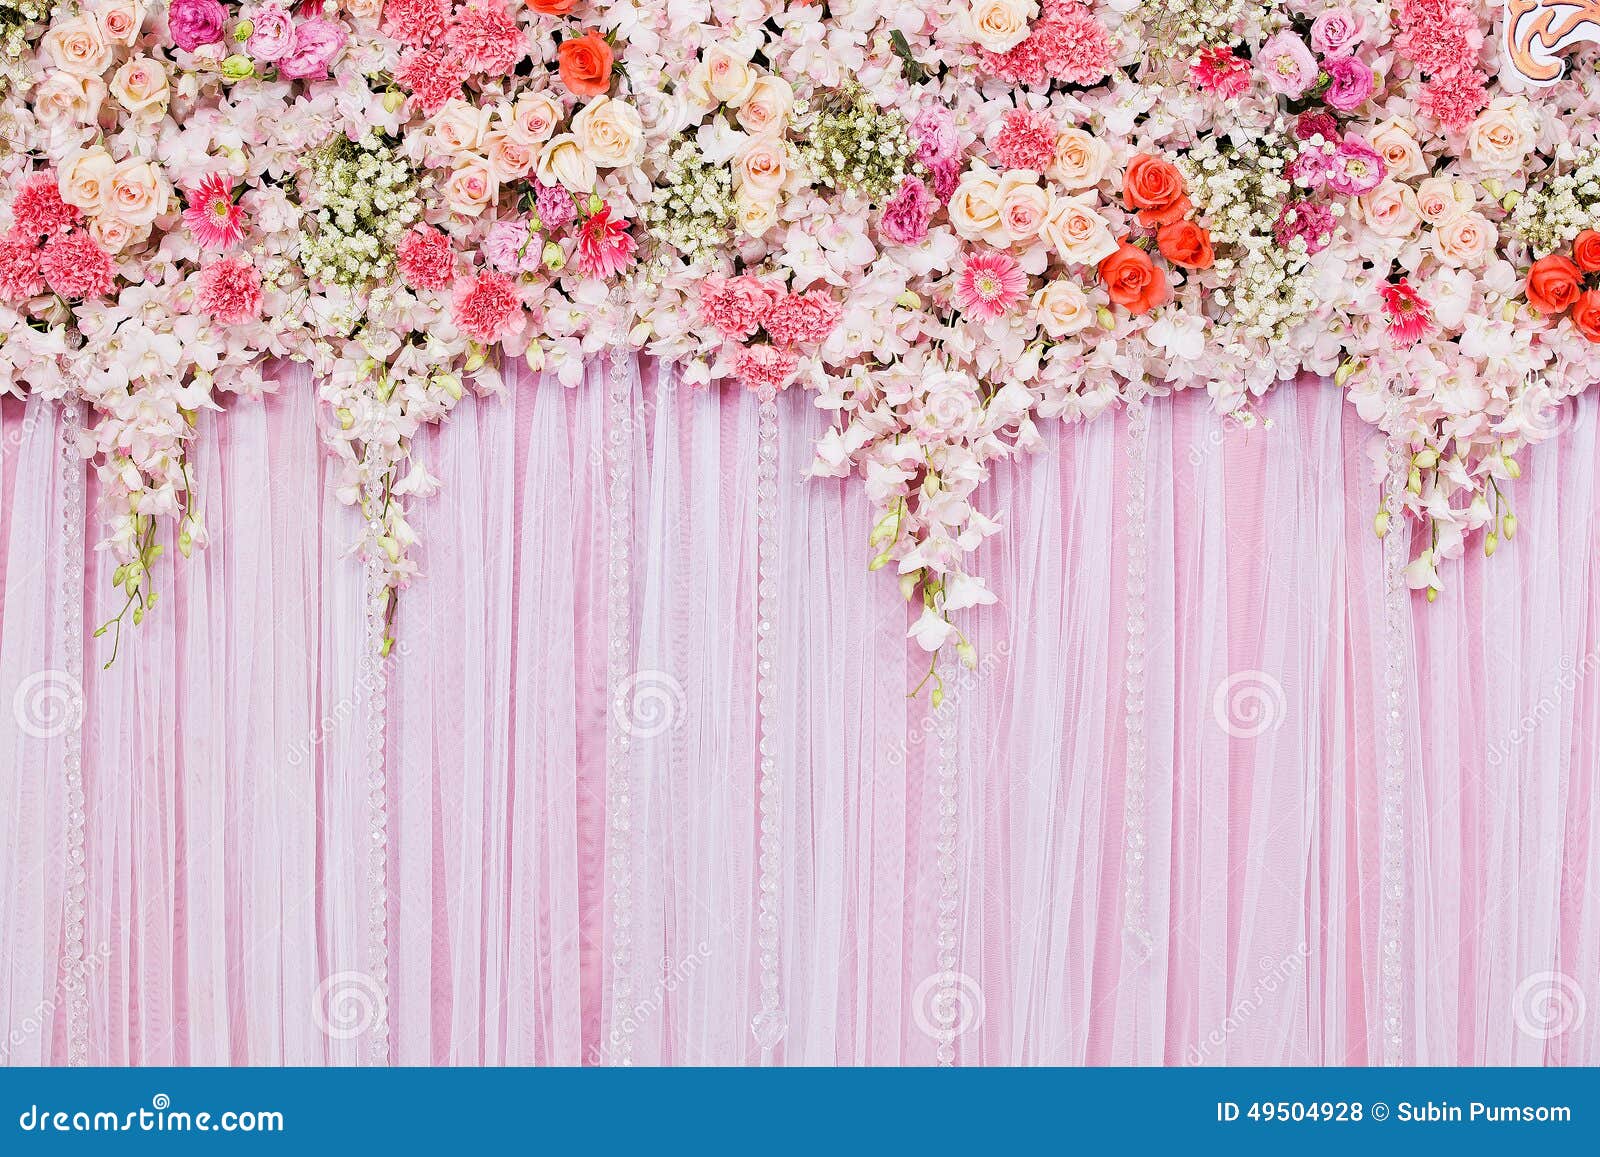 Beautiful Flowers Background Stock Photo - Image of flowers, curtain ...